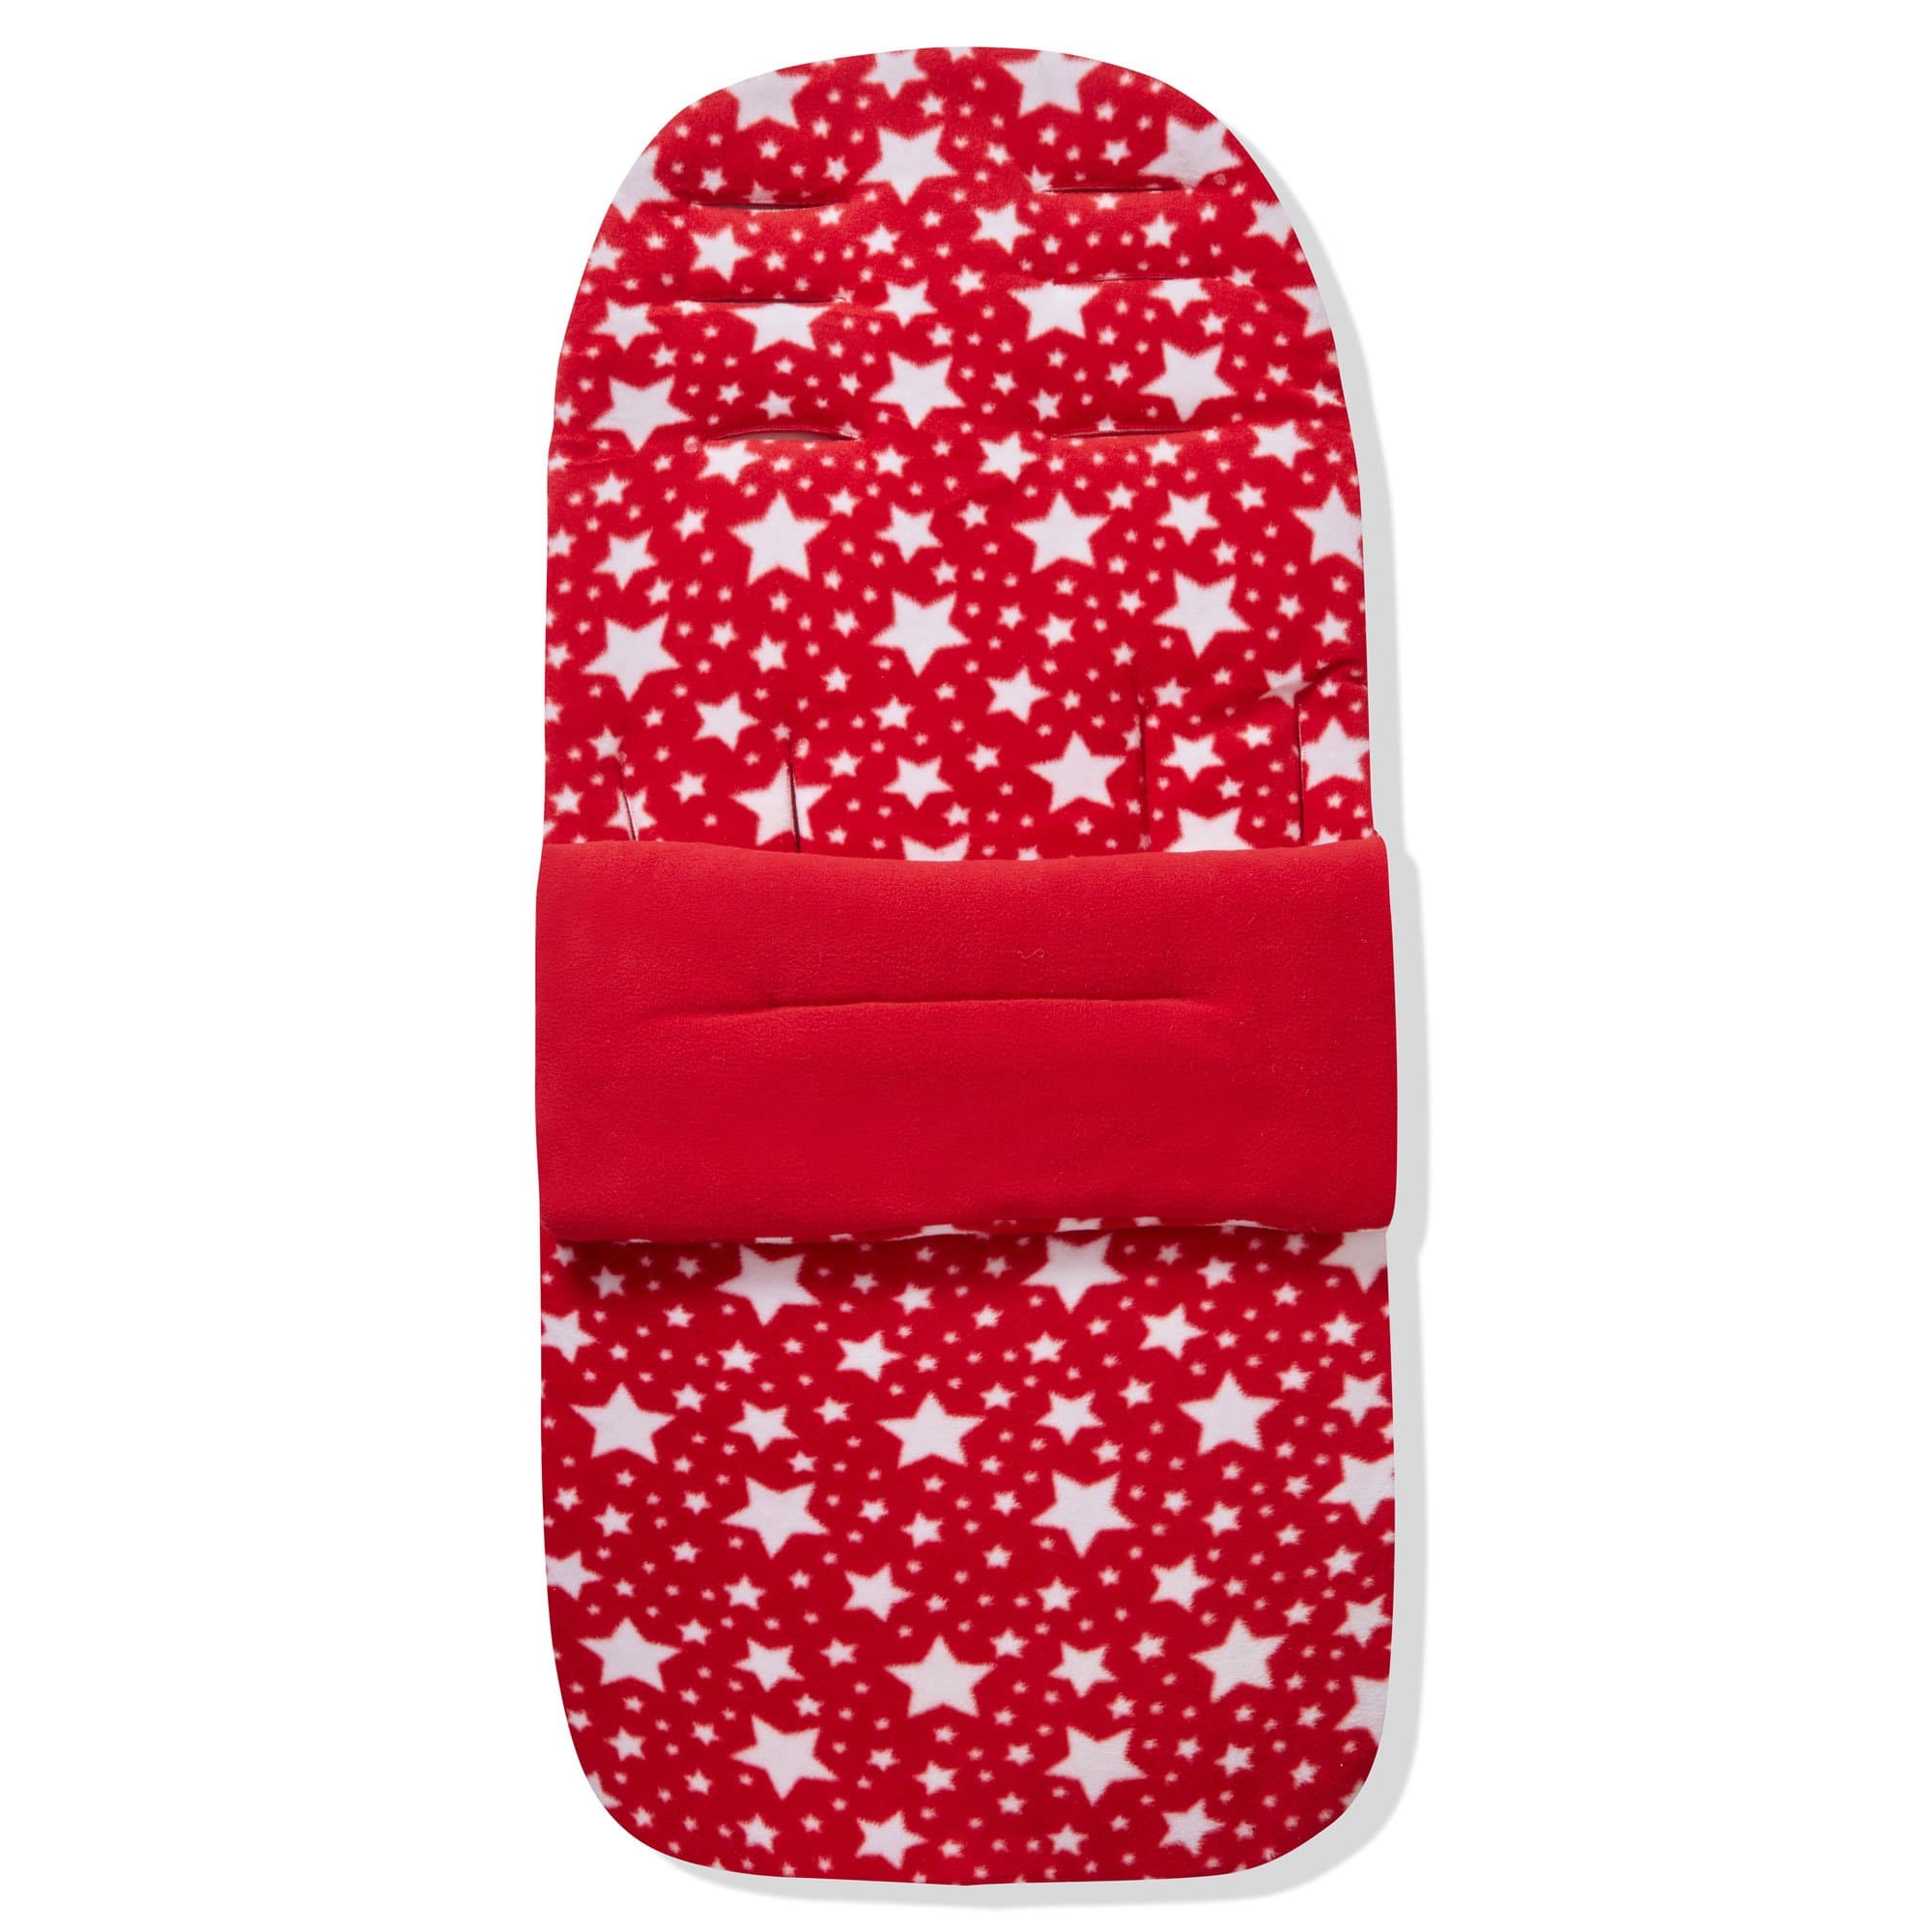 Fleece Footmuff / Cosy Toes Compatible with Gesslein - For Your Little One